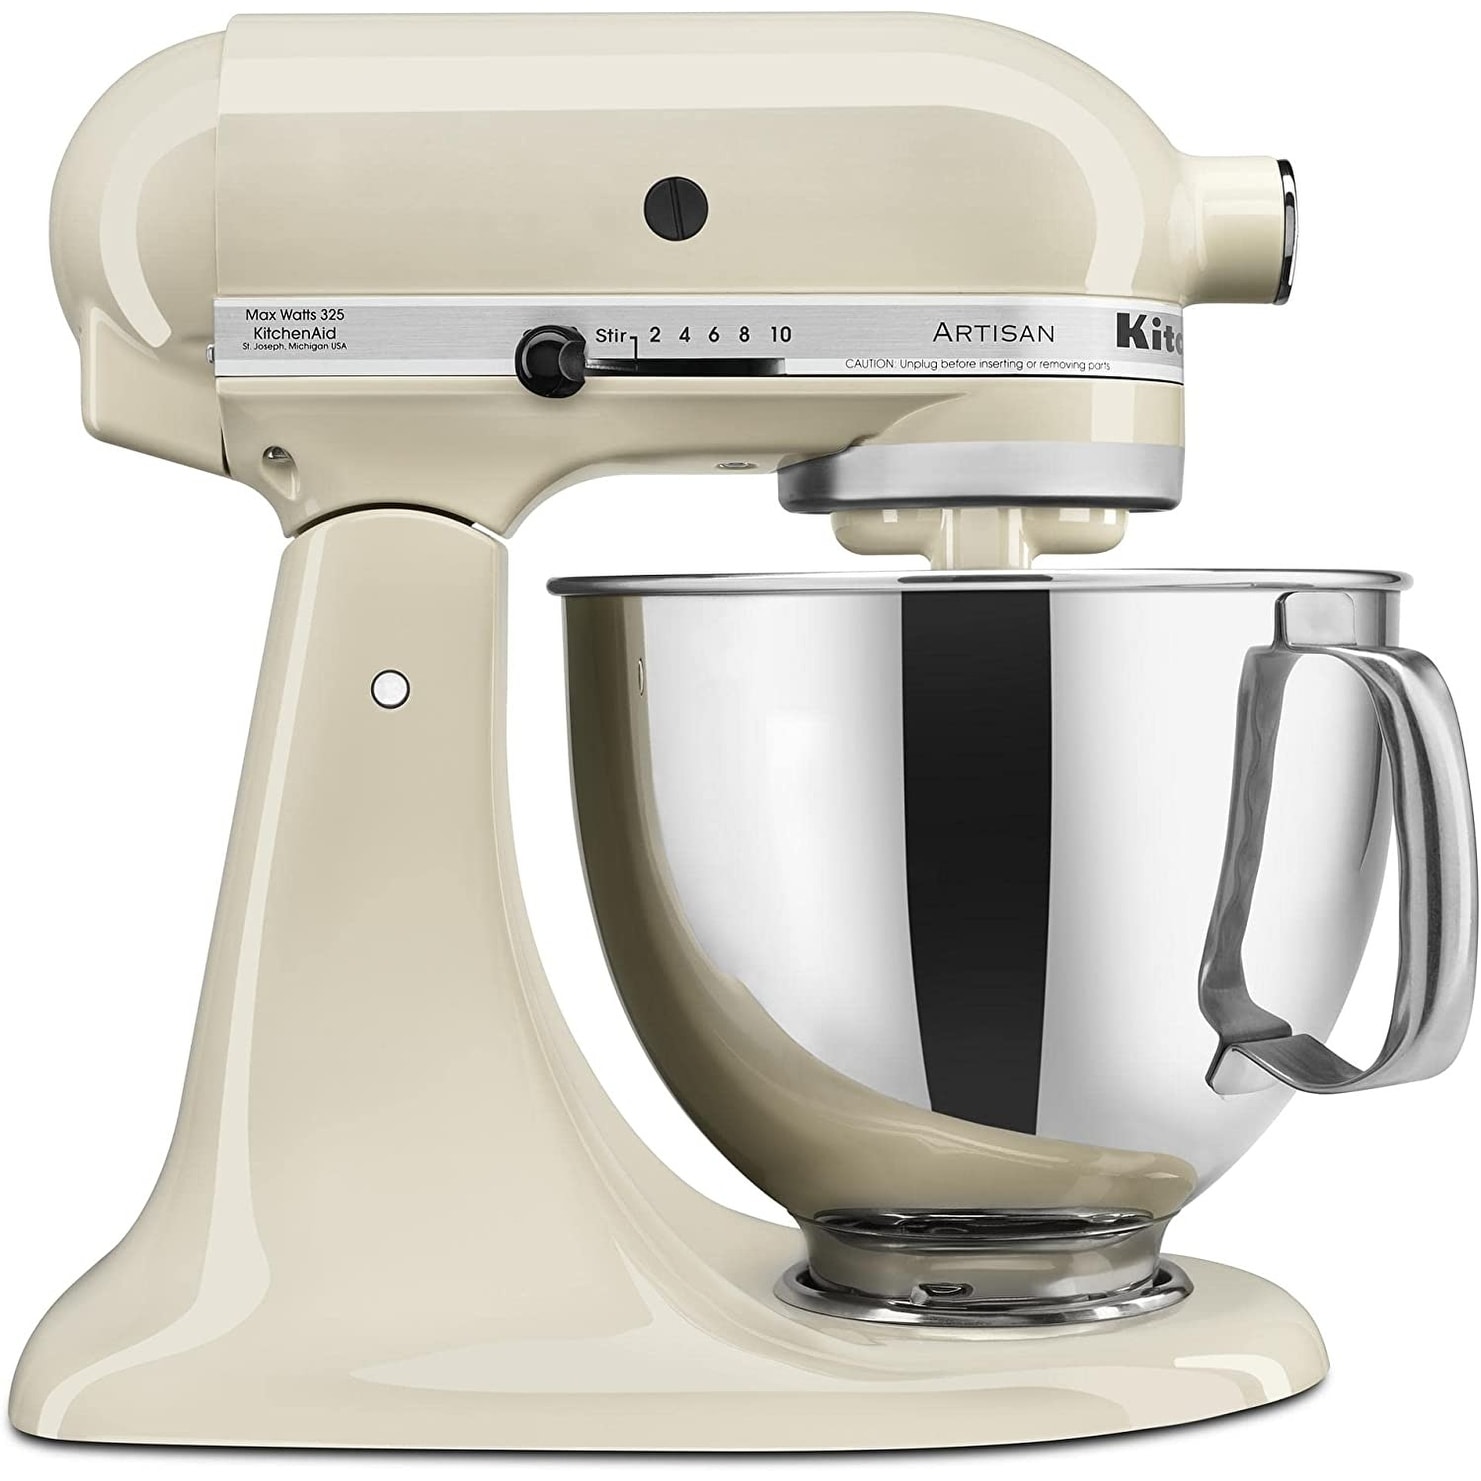 https://ak1.ostkcdn.com/images/products/is/images/direct/cad265d571bb4d5a4c93f65d9eb2ab9fd9ee399f/KitchenAid-Artisan-Series-5-Qt.-Stand-Mixer-with-Pouring-Shield.jpg